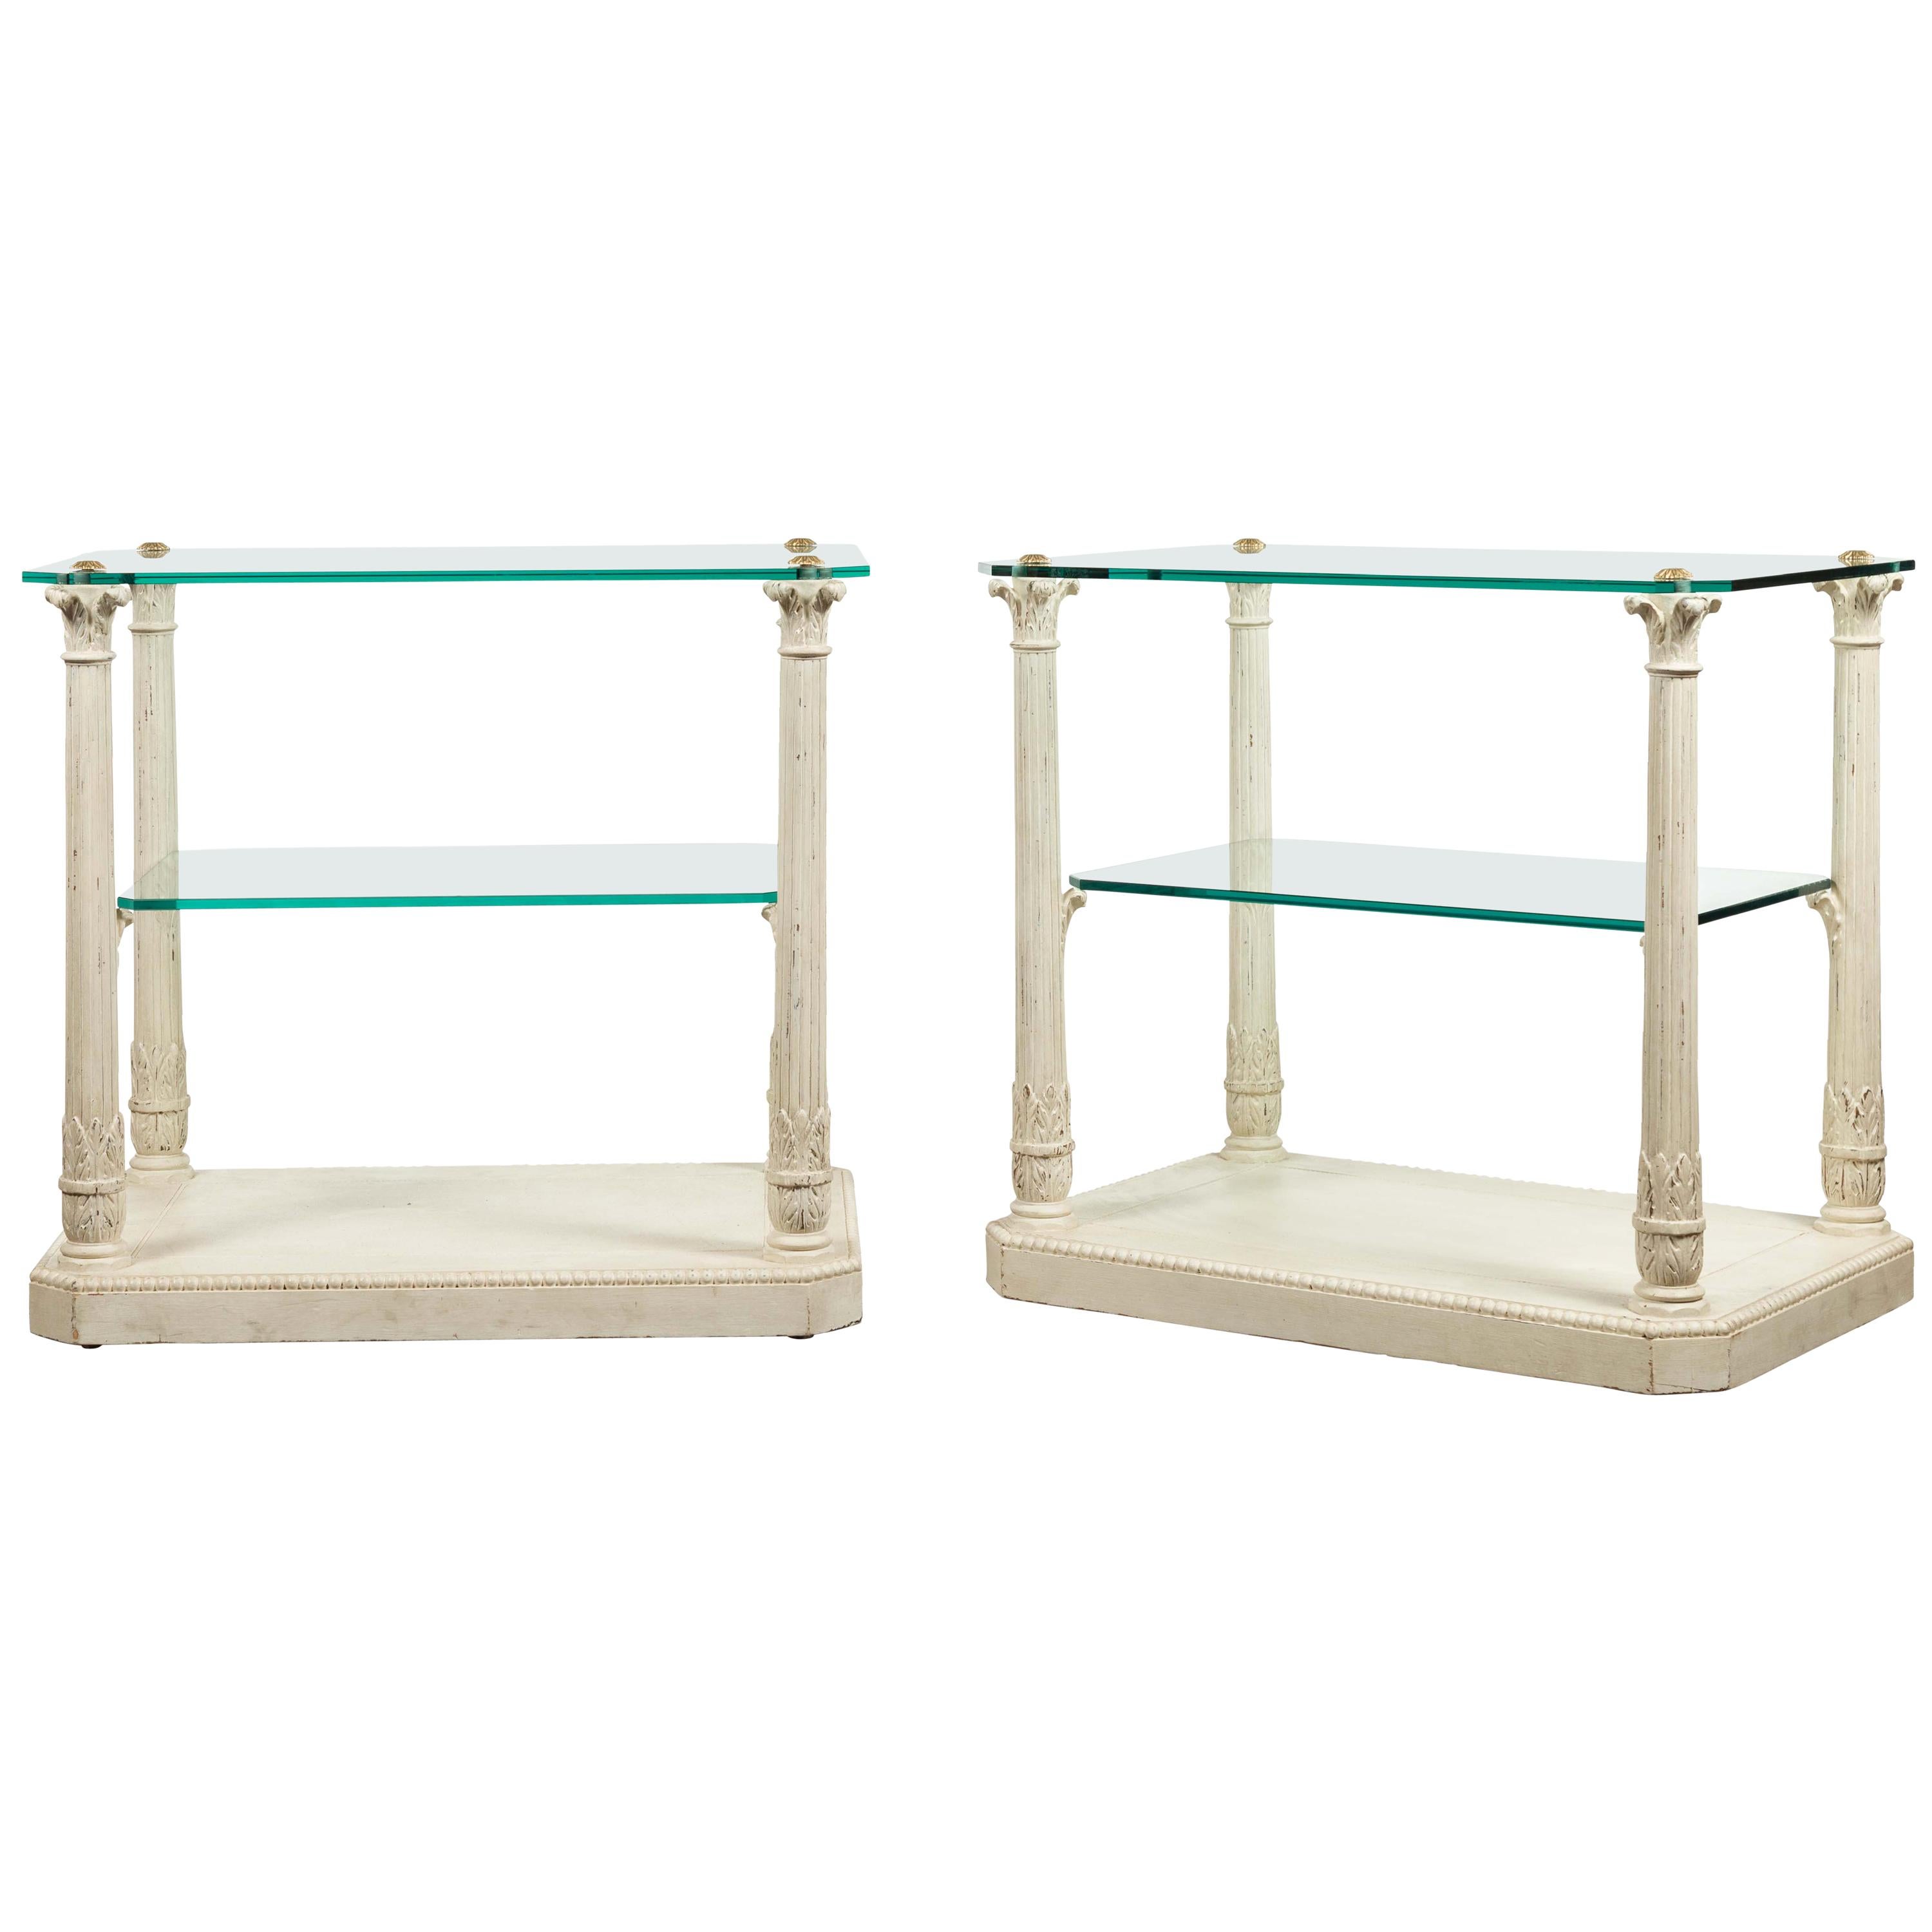 Pair of French Maison Jansen Glass Top Column Tables with Corinthian Capitals